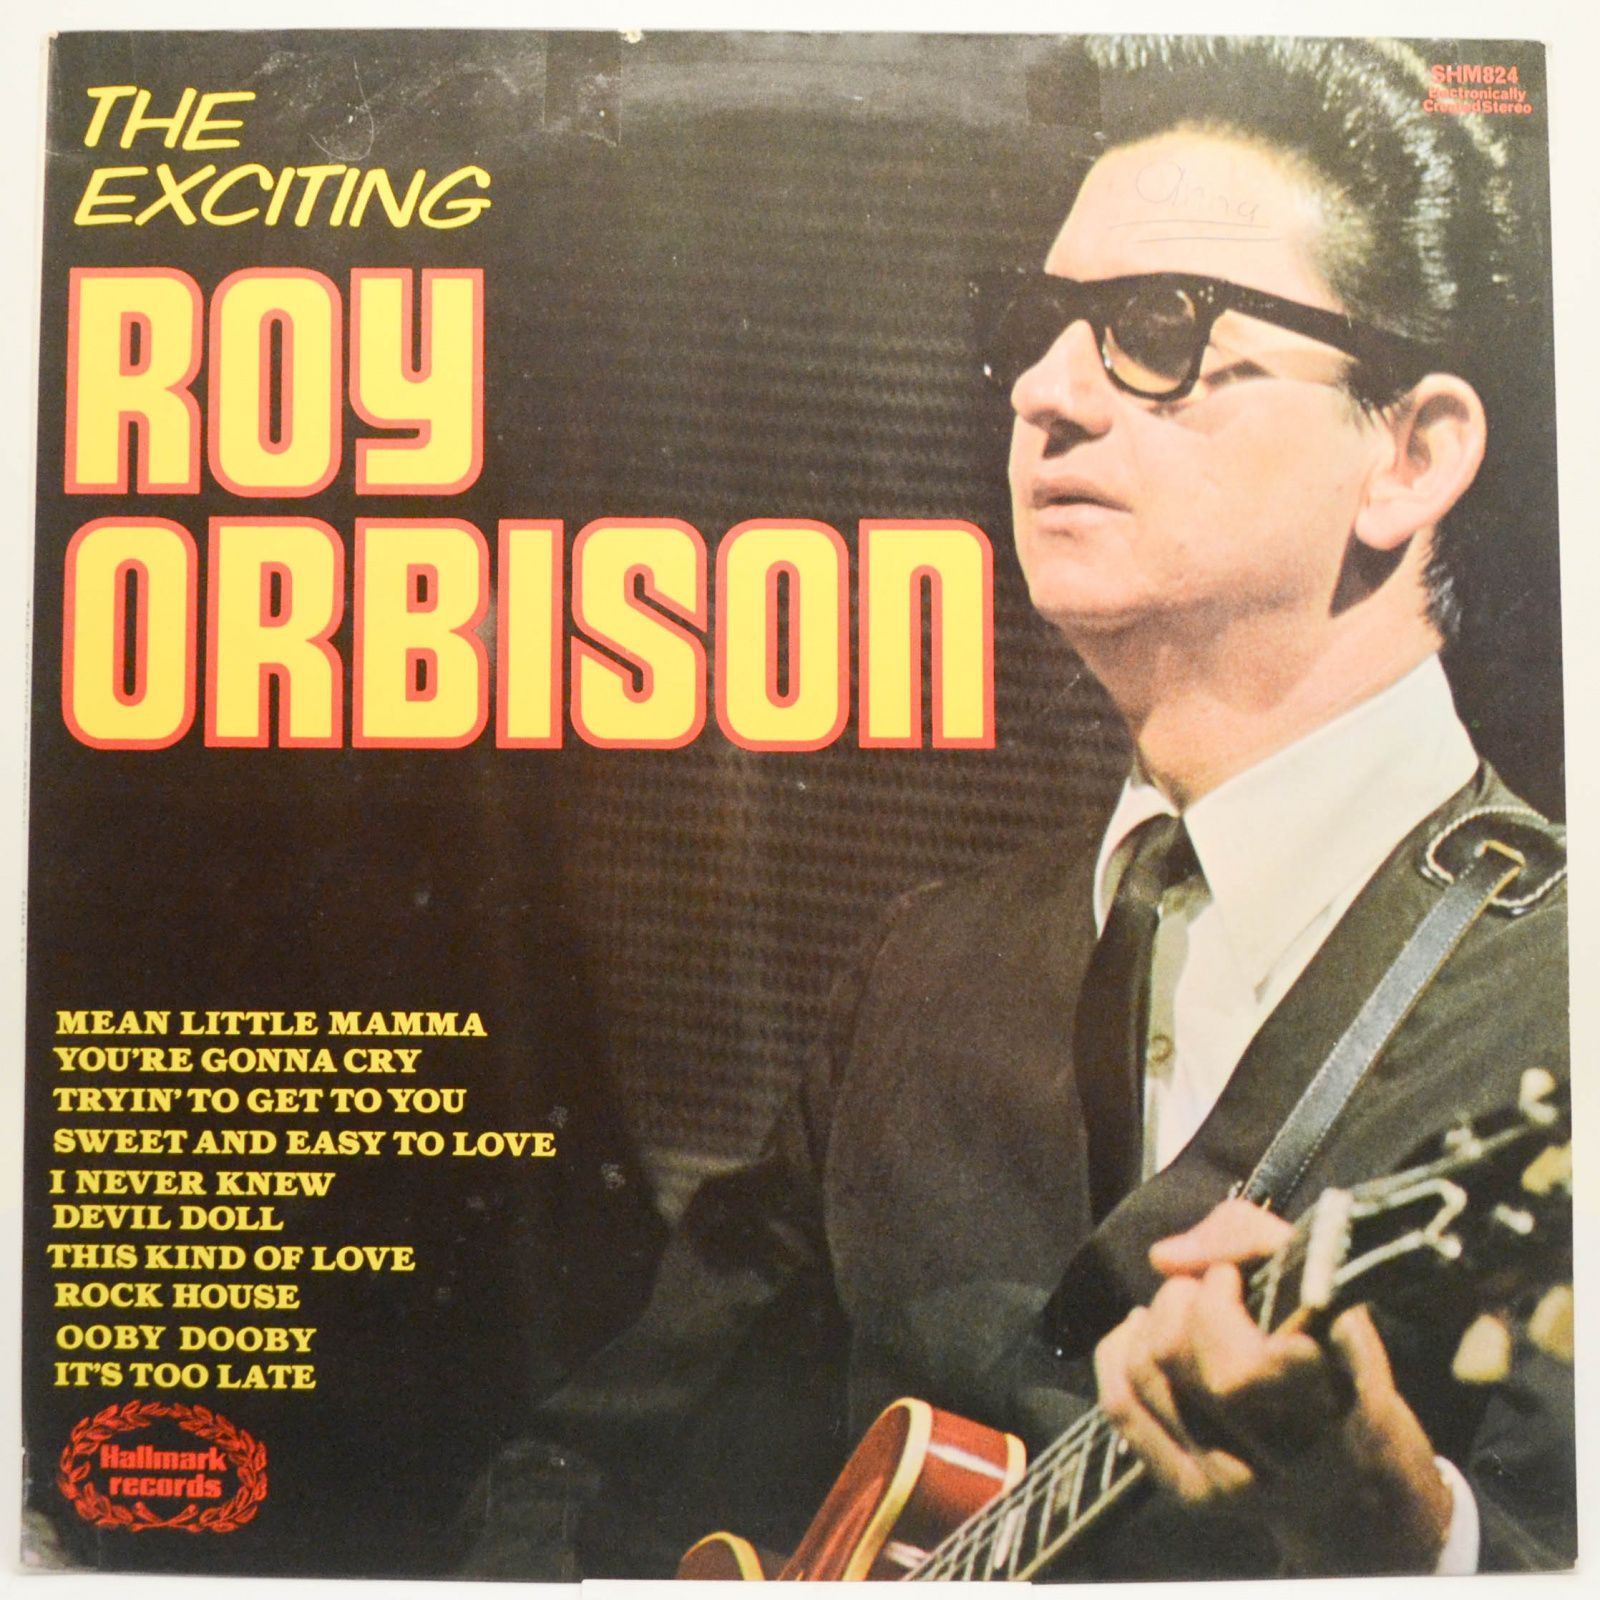 The Exciting Roy Orbison (UK), 1974